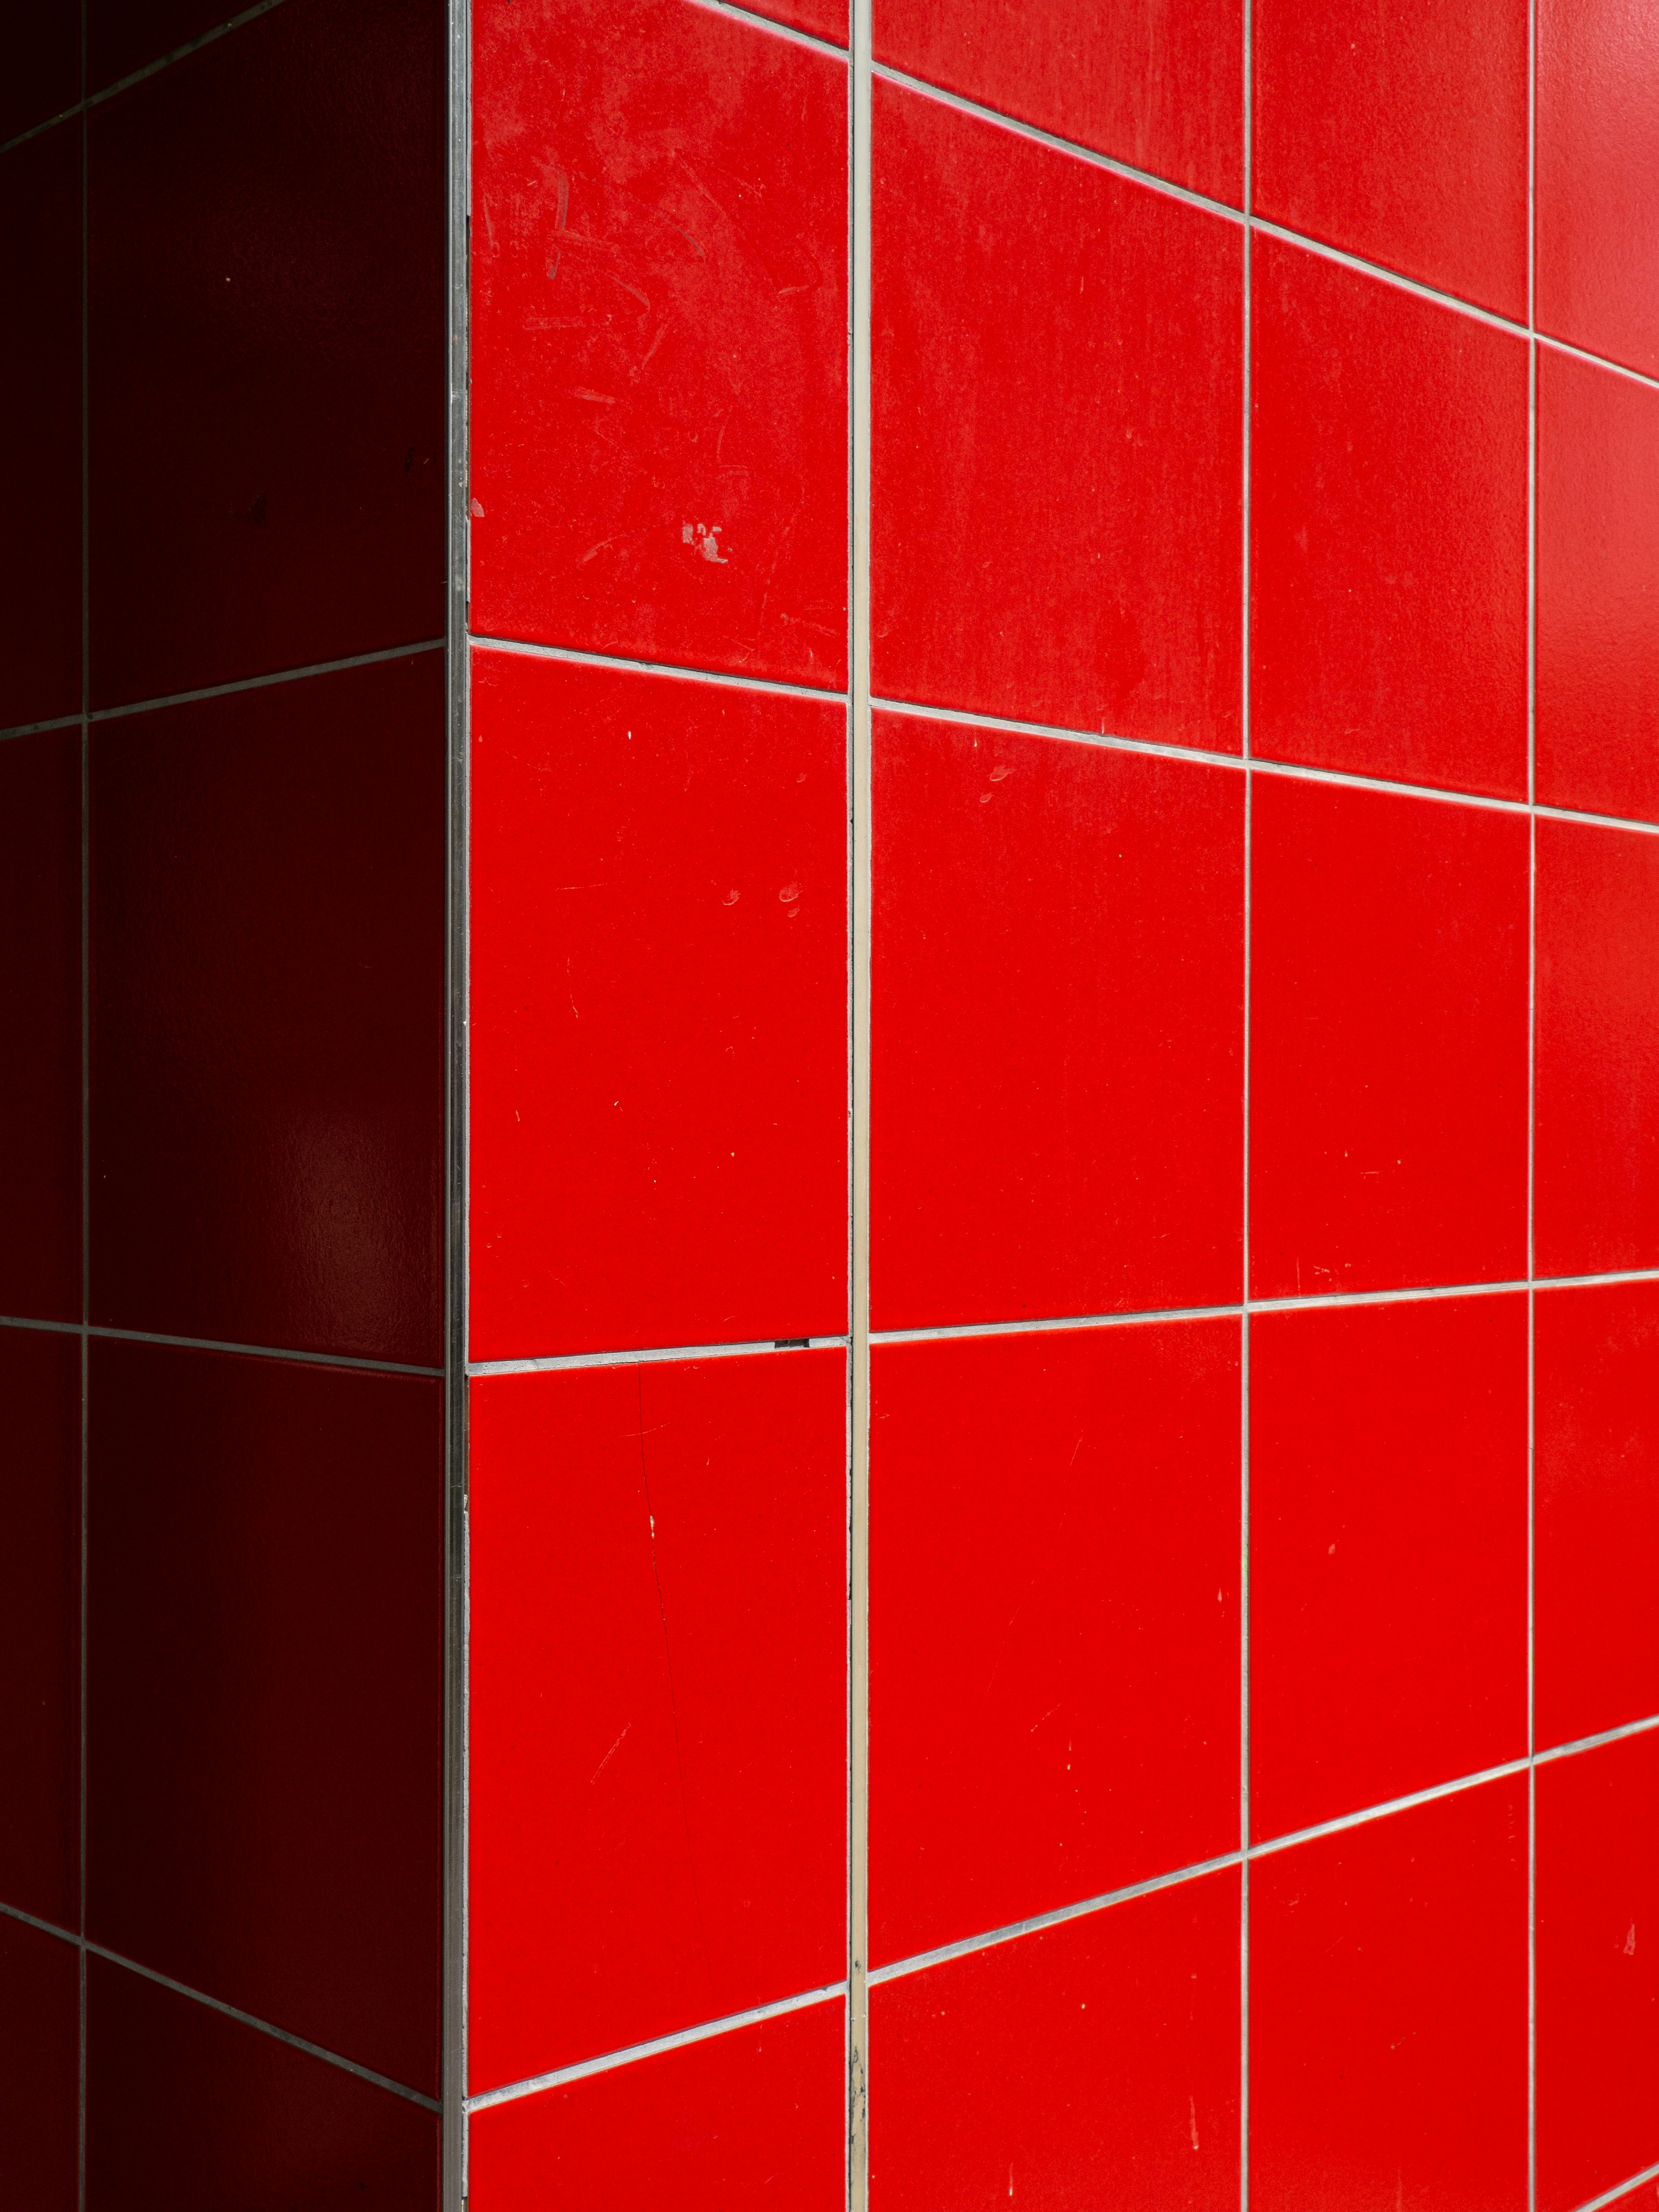 red and white ceramic tiles